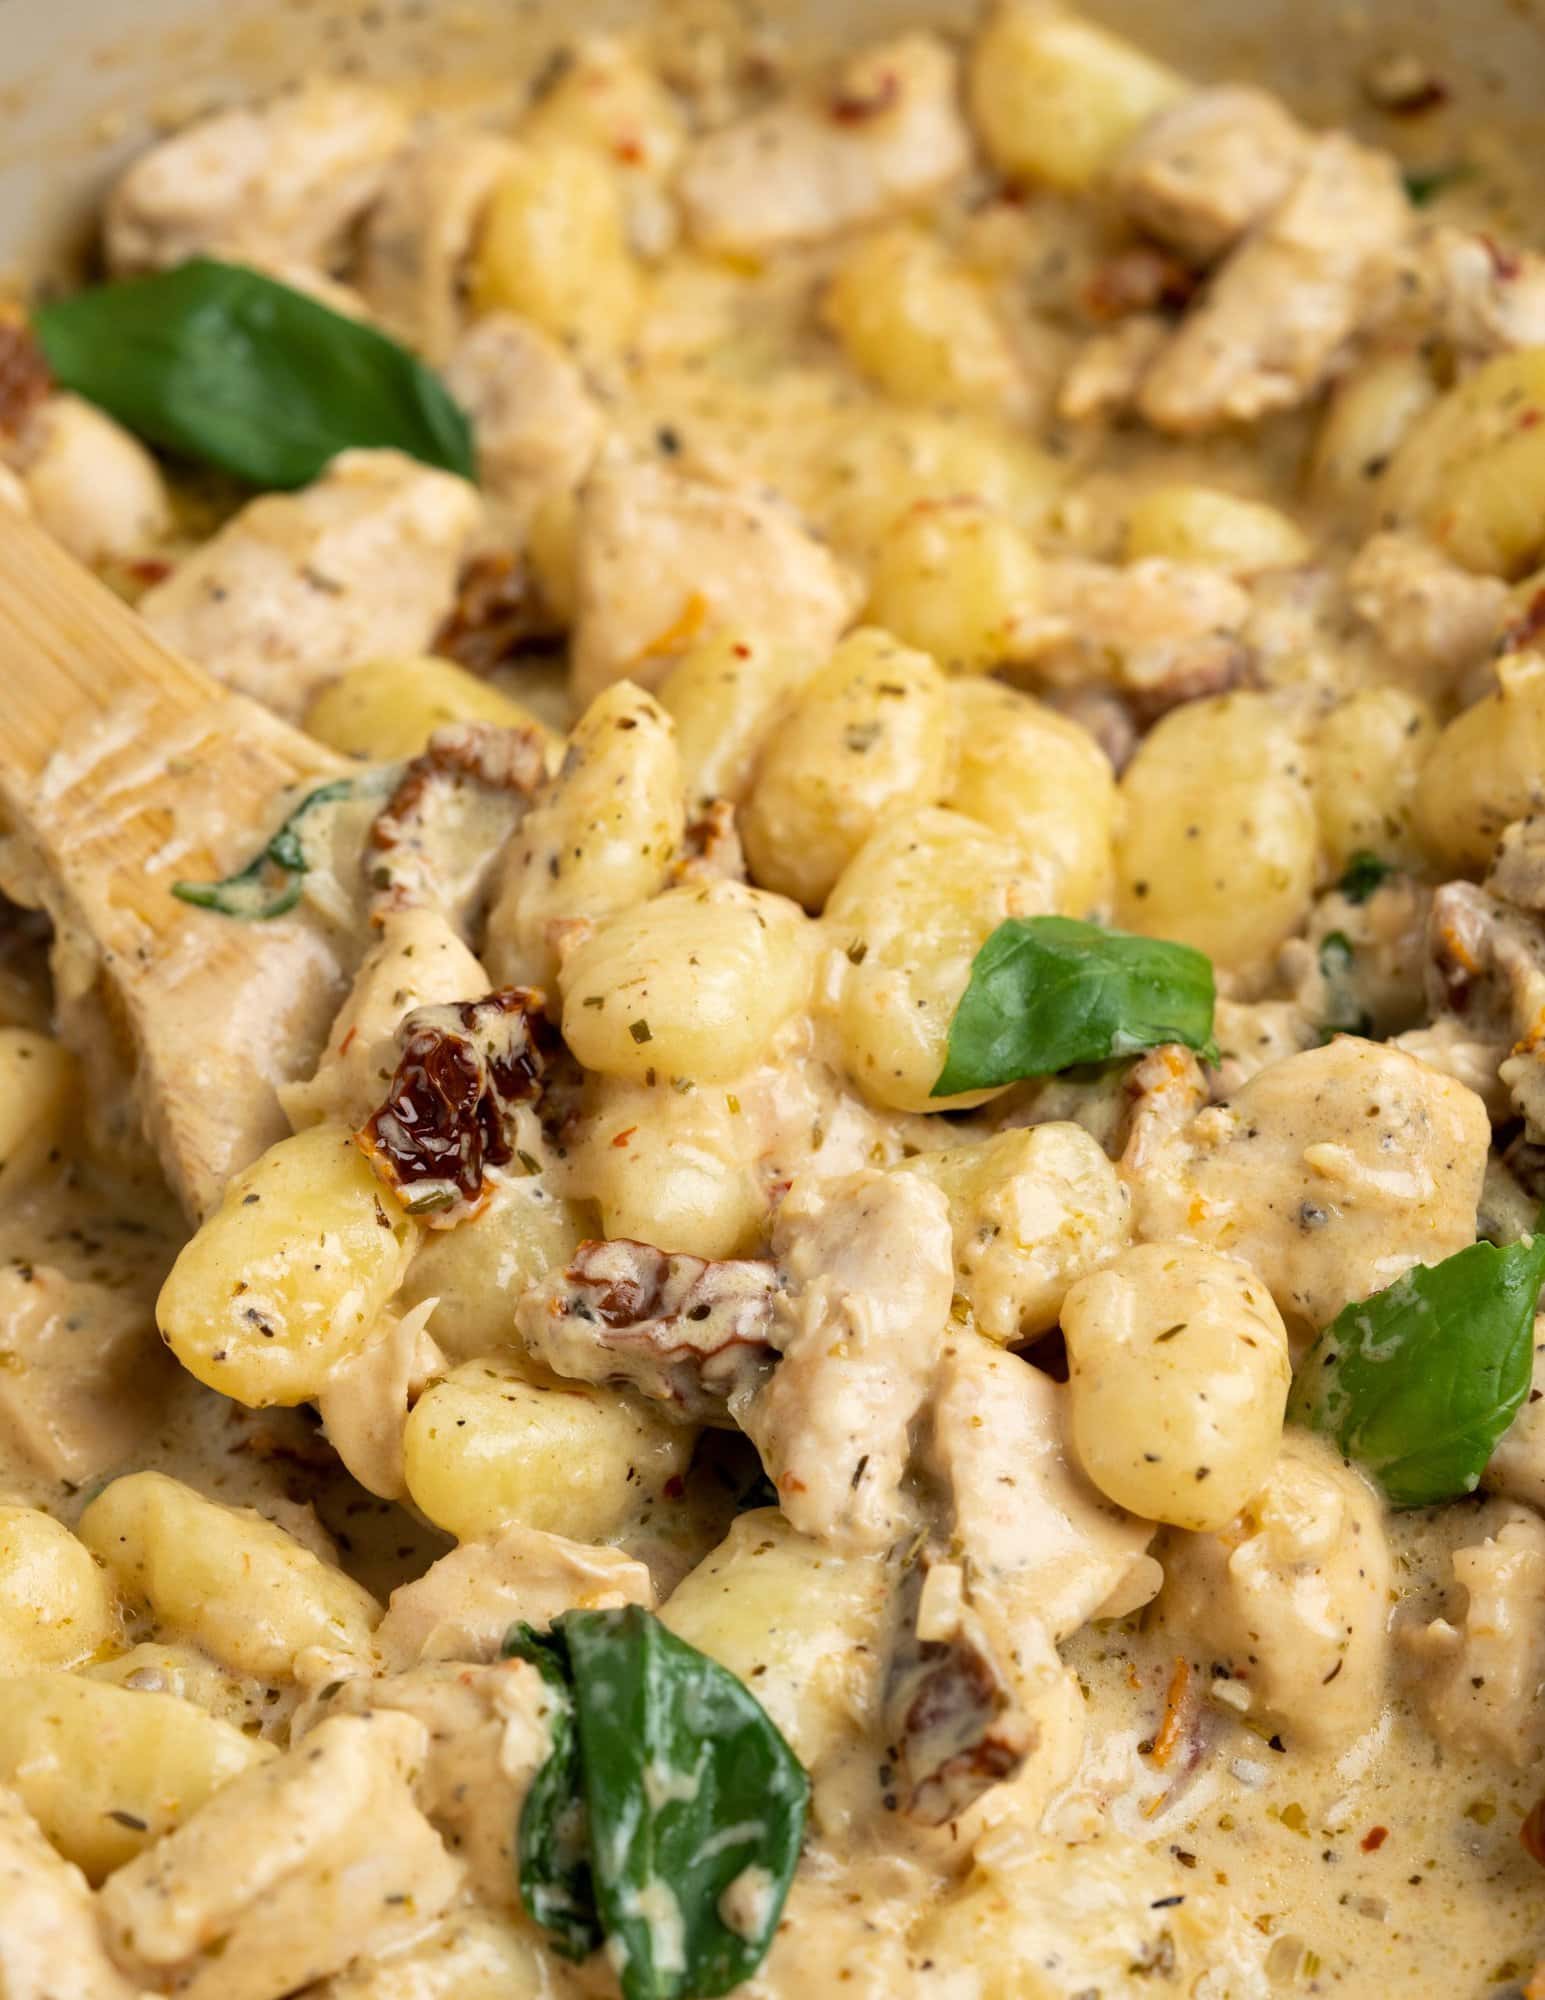 chicken breast, gnocchi in a creamy parmesan sauce with sundried tomatoes, Italian basil.